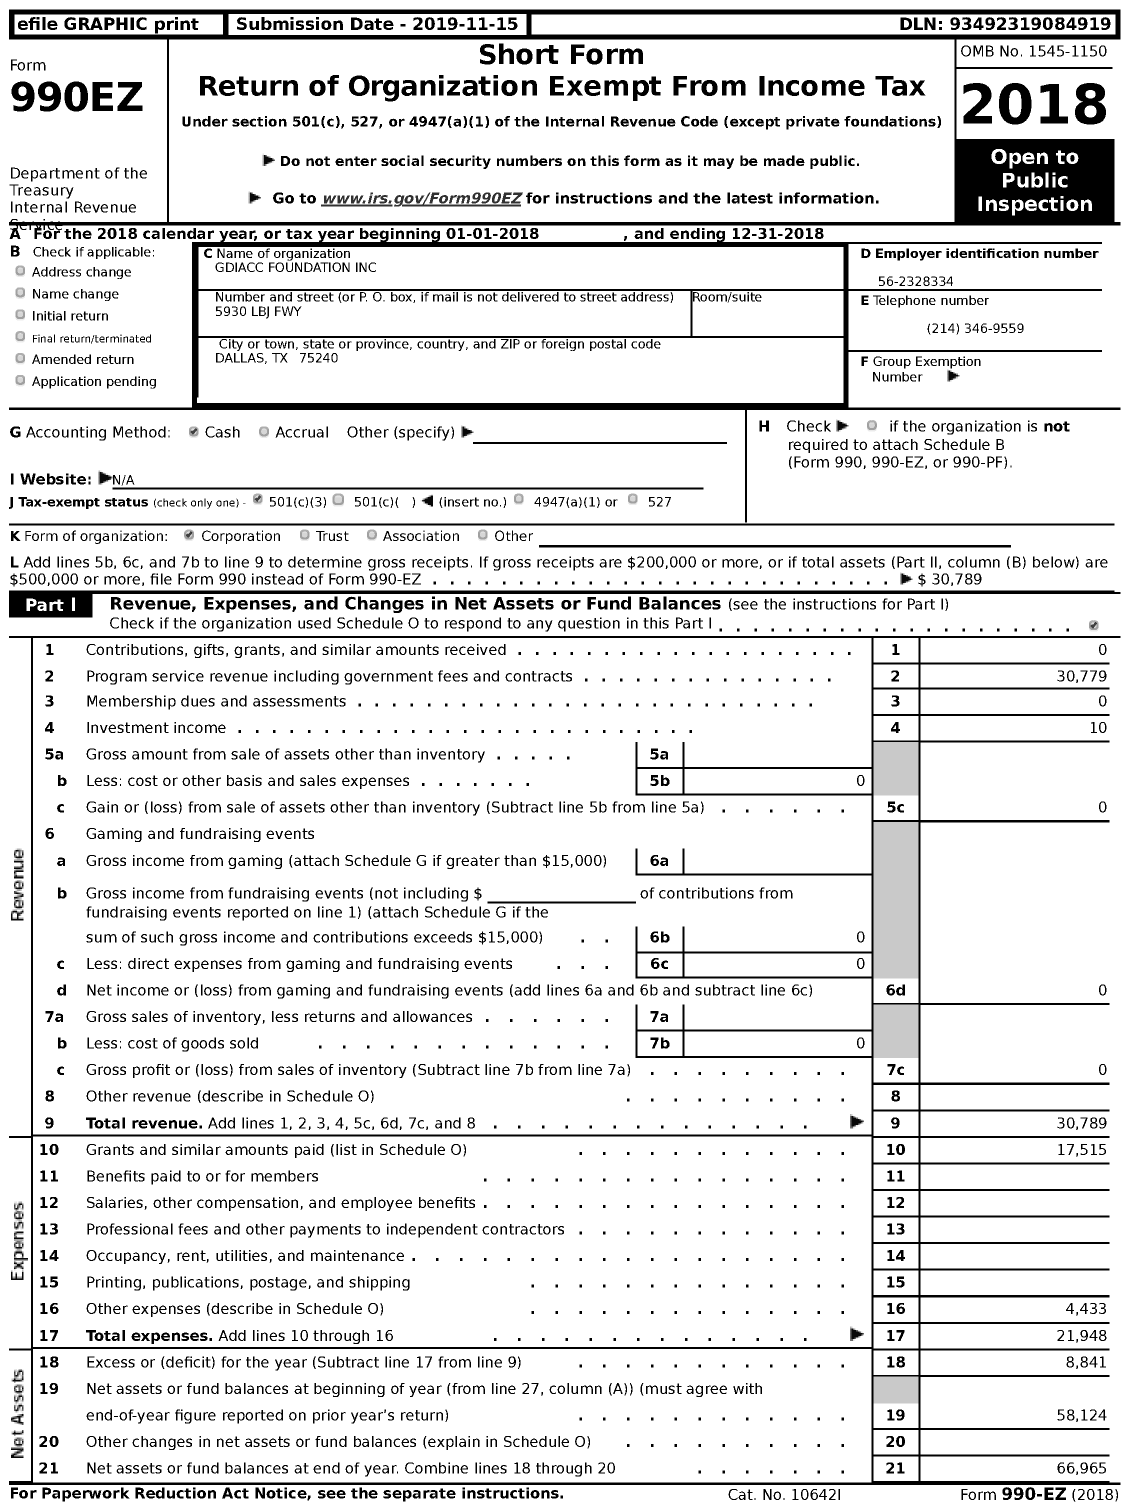 Image of first page of 2018 Form 990EZ for Gdiacc Foundation